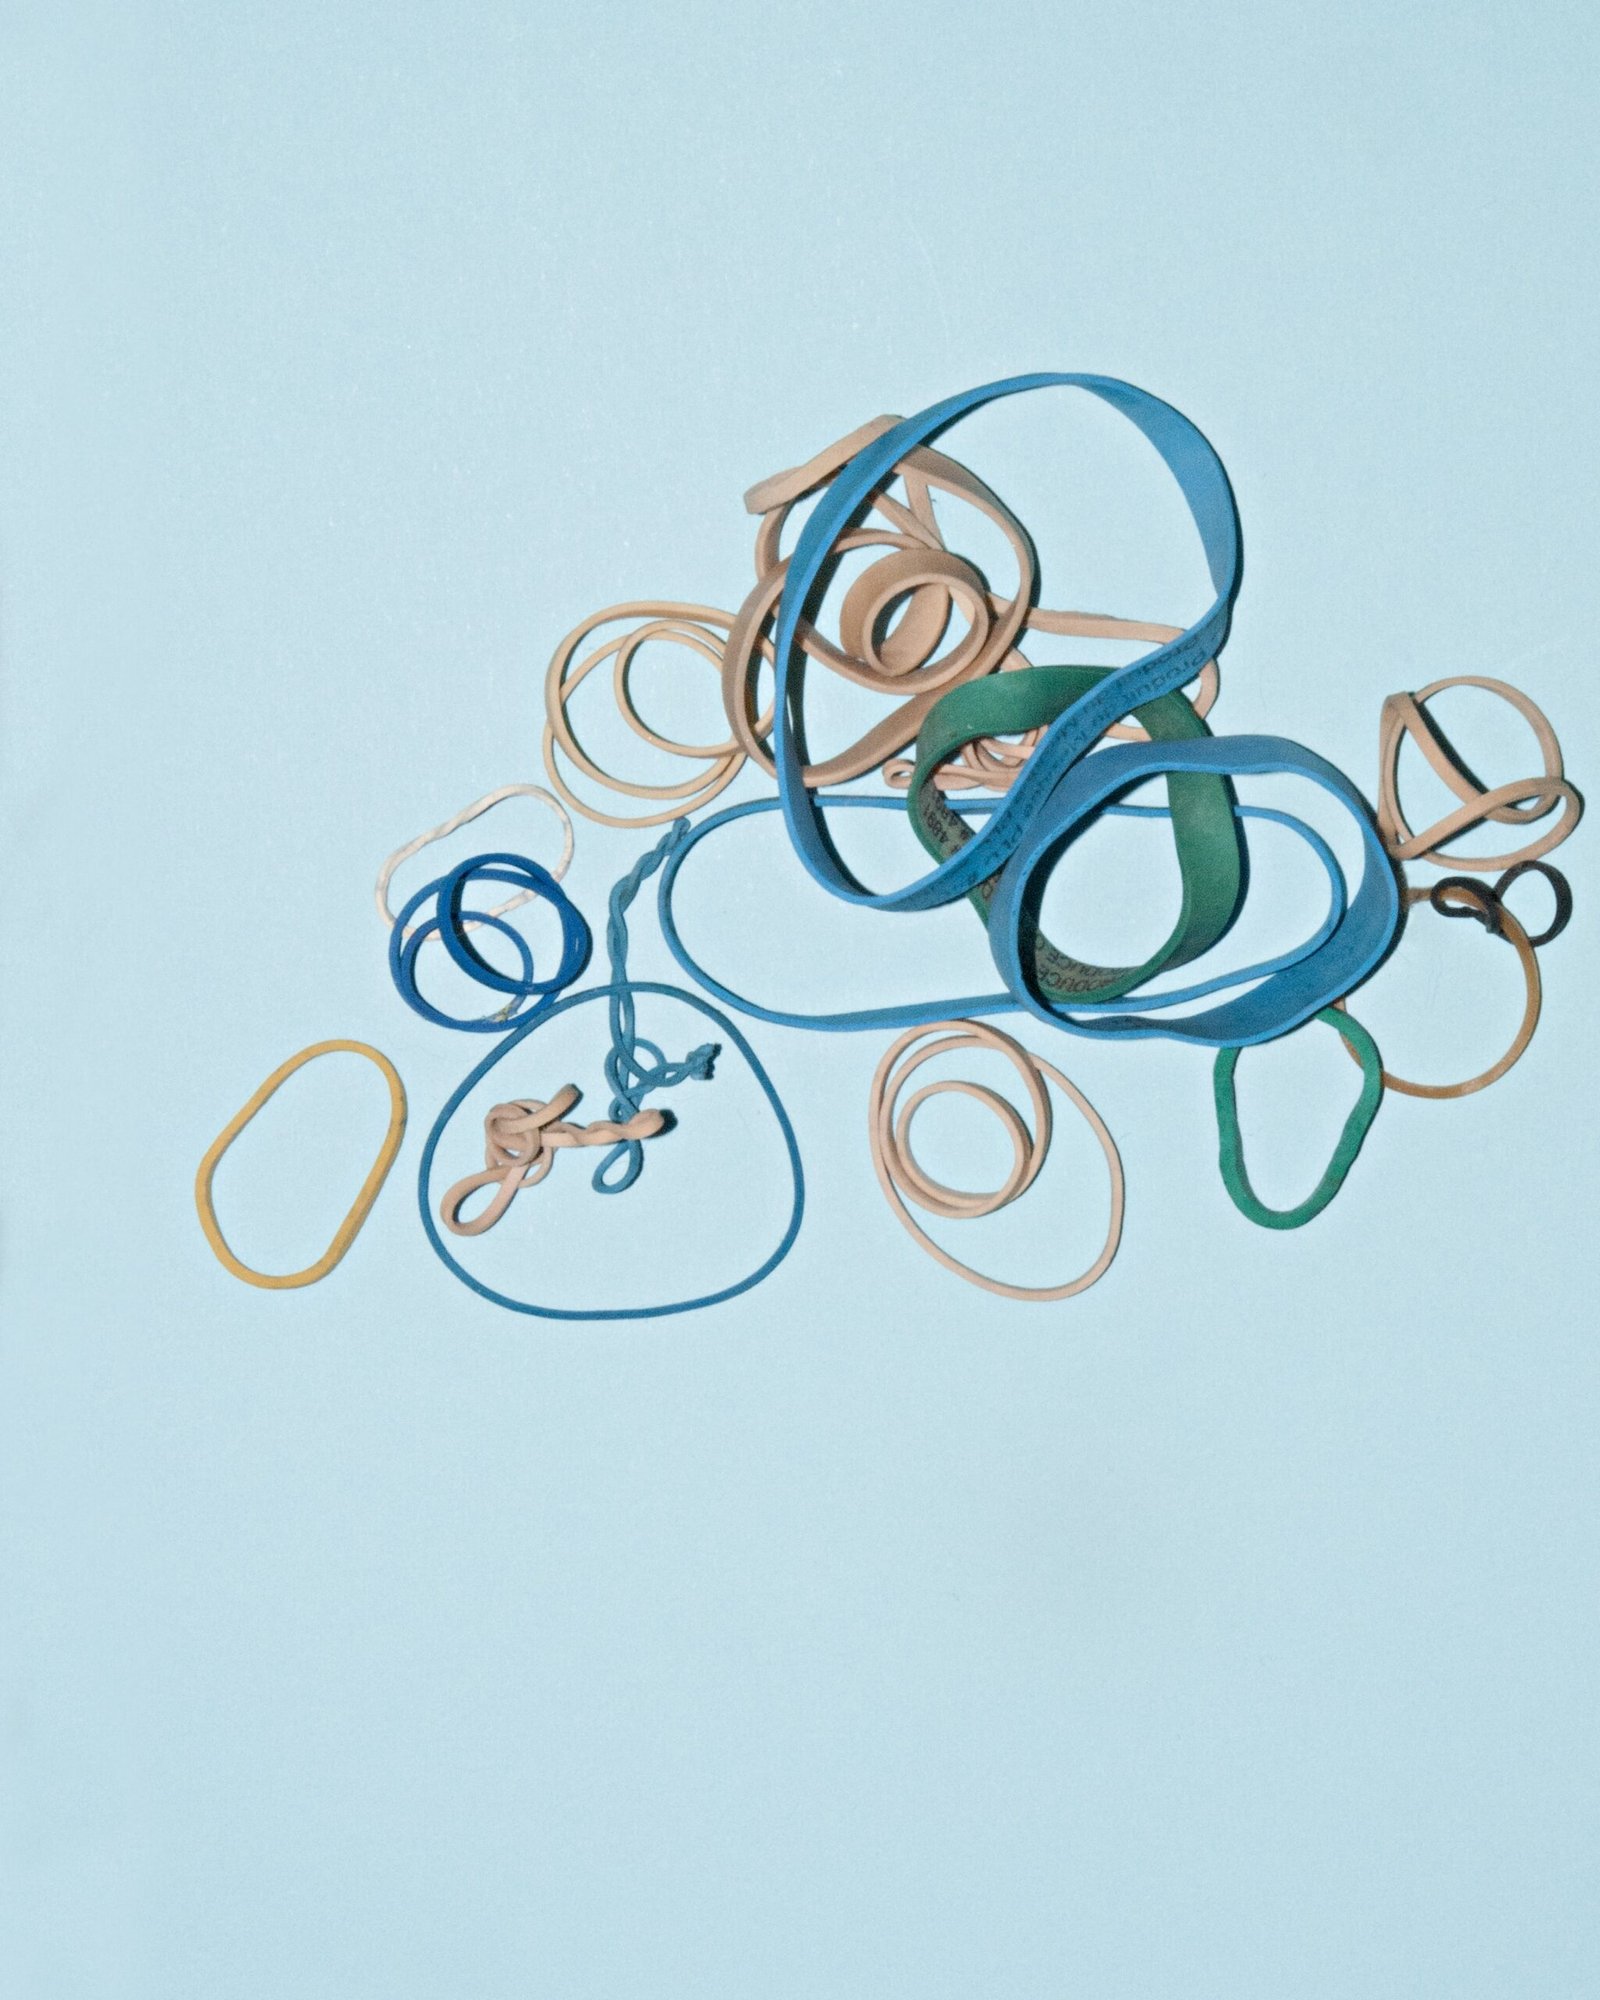 You are currently viewing The Versatile and Handy Rubber Band: More Than Just an Office Supply